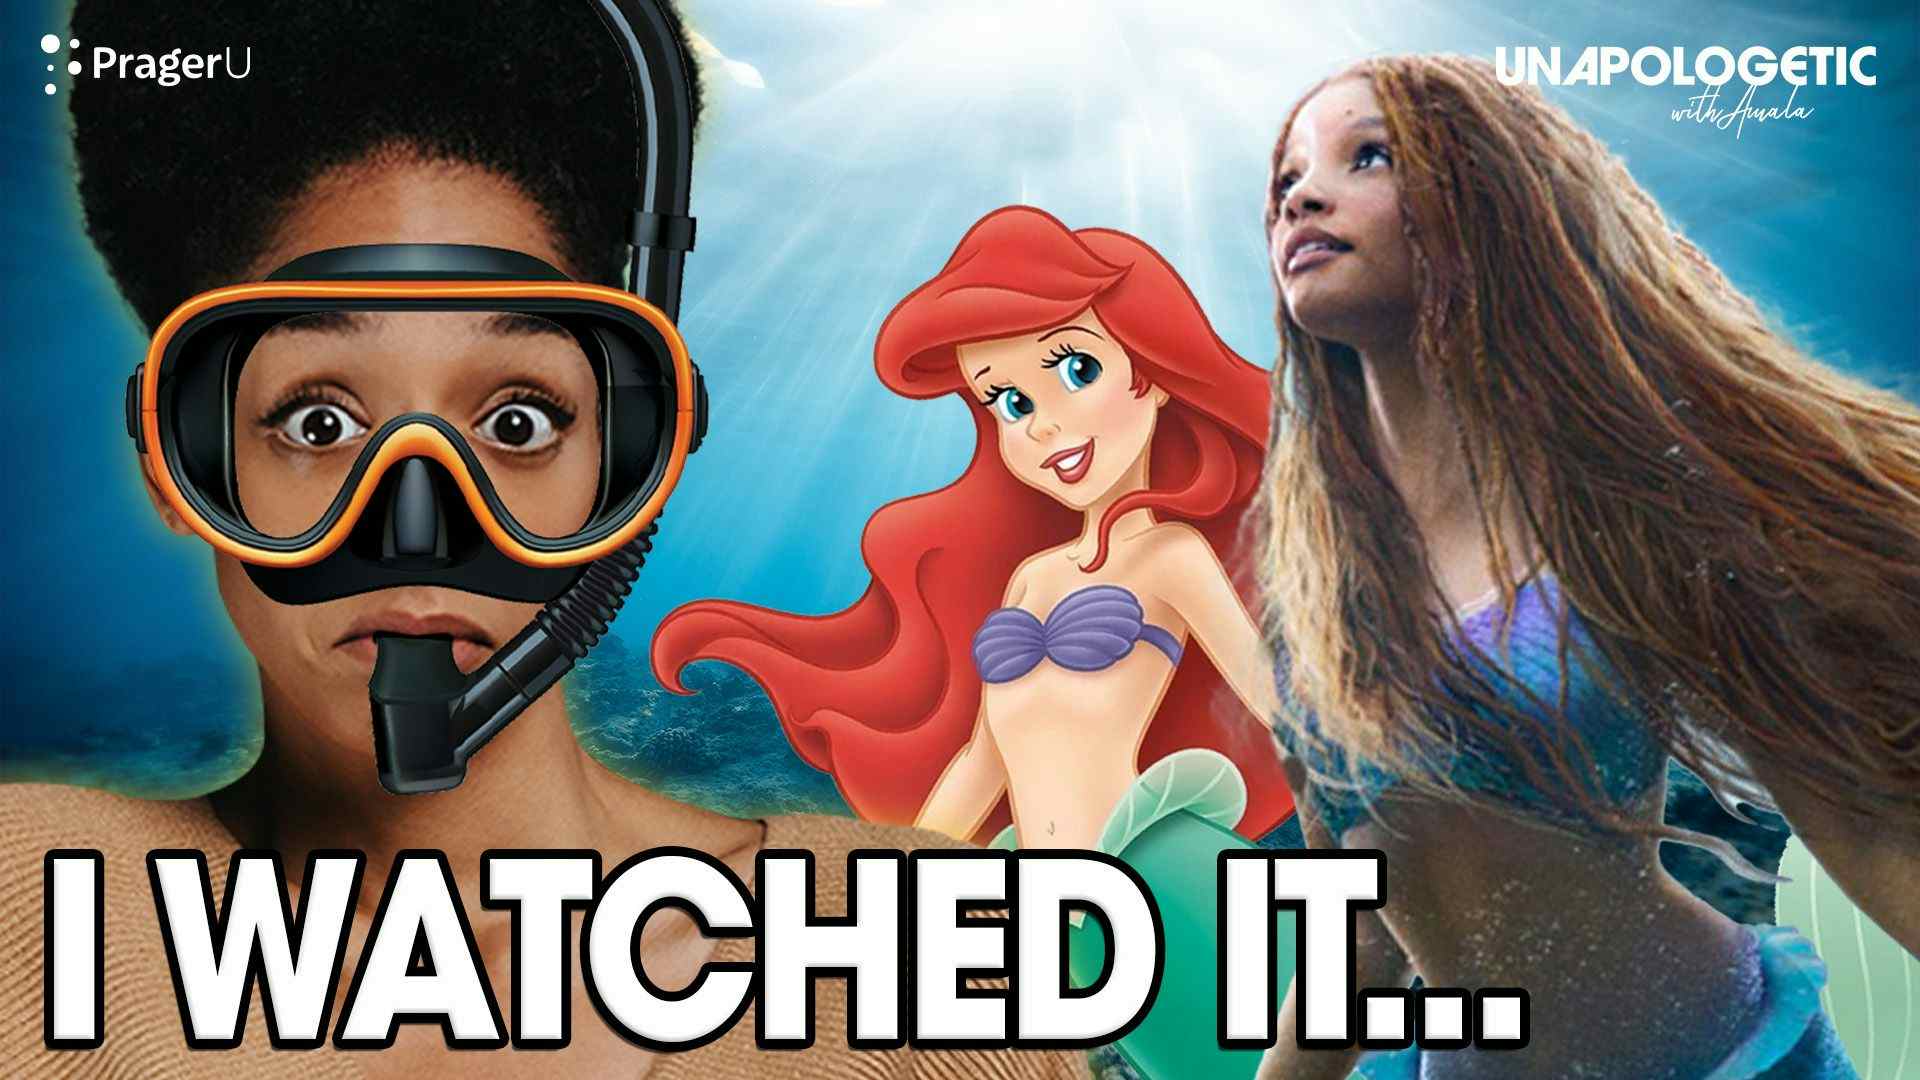 I Watched “The Little Mermaid”